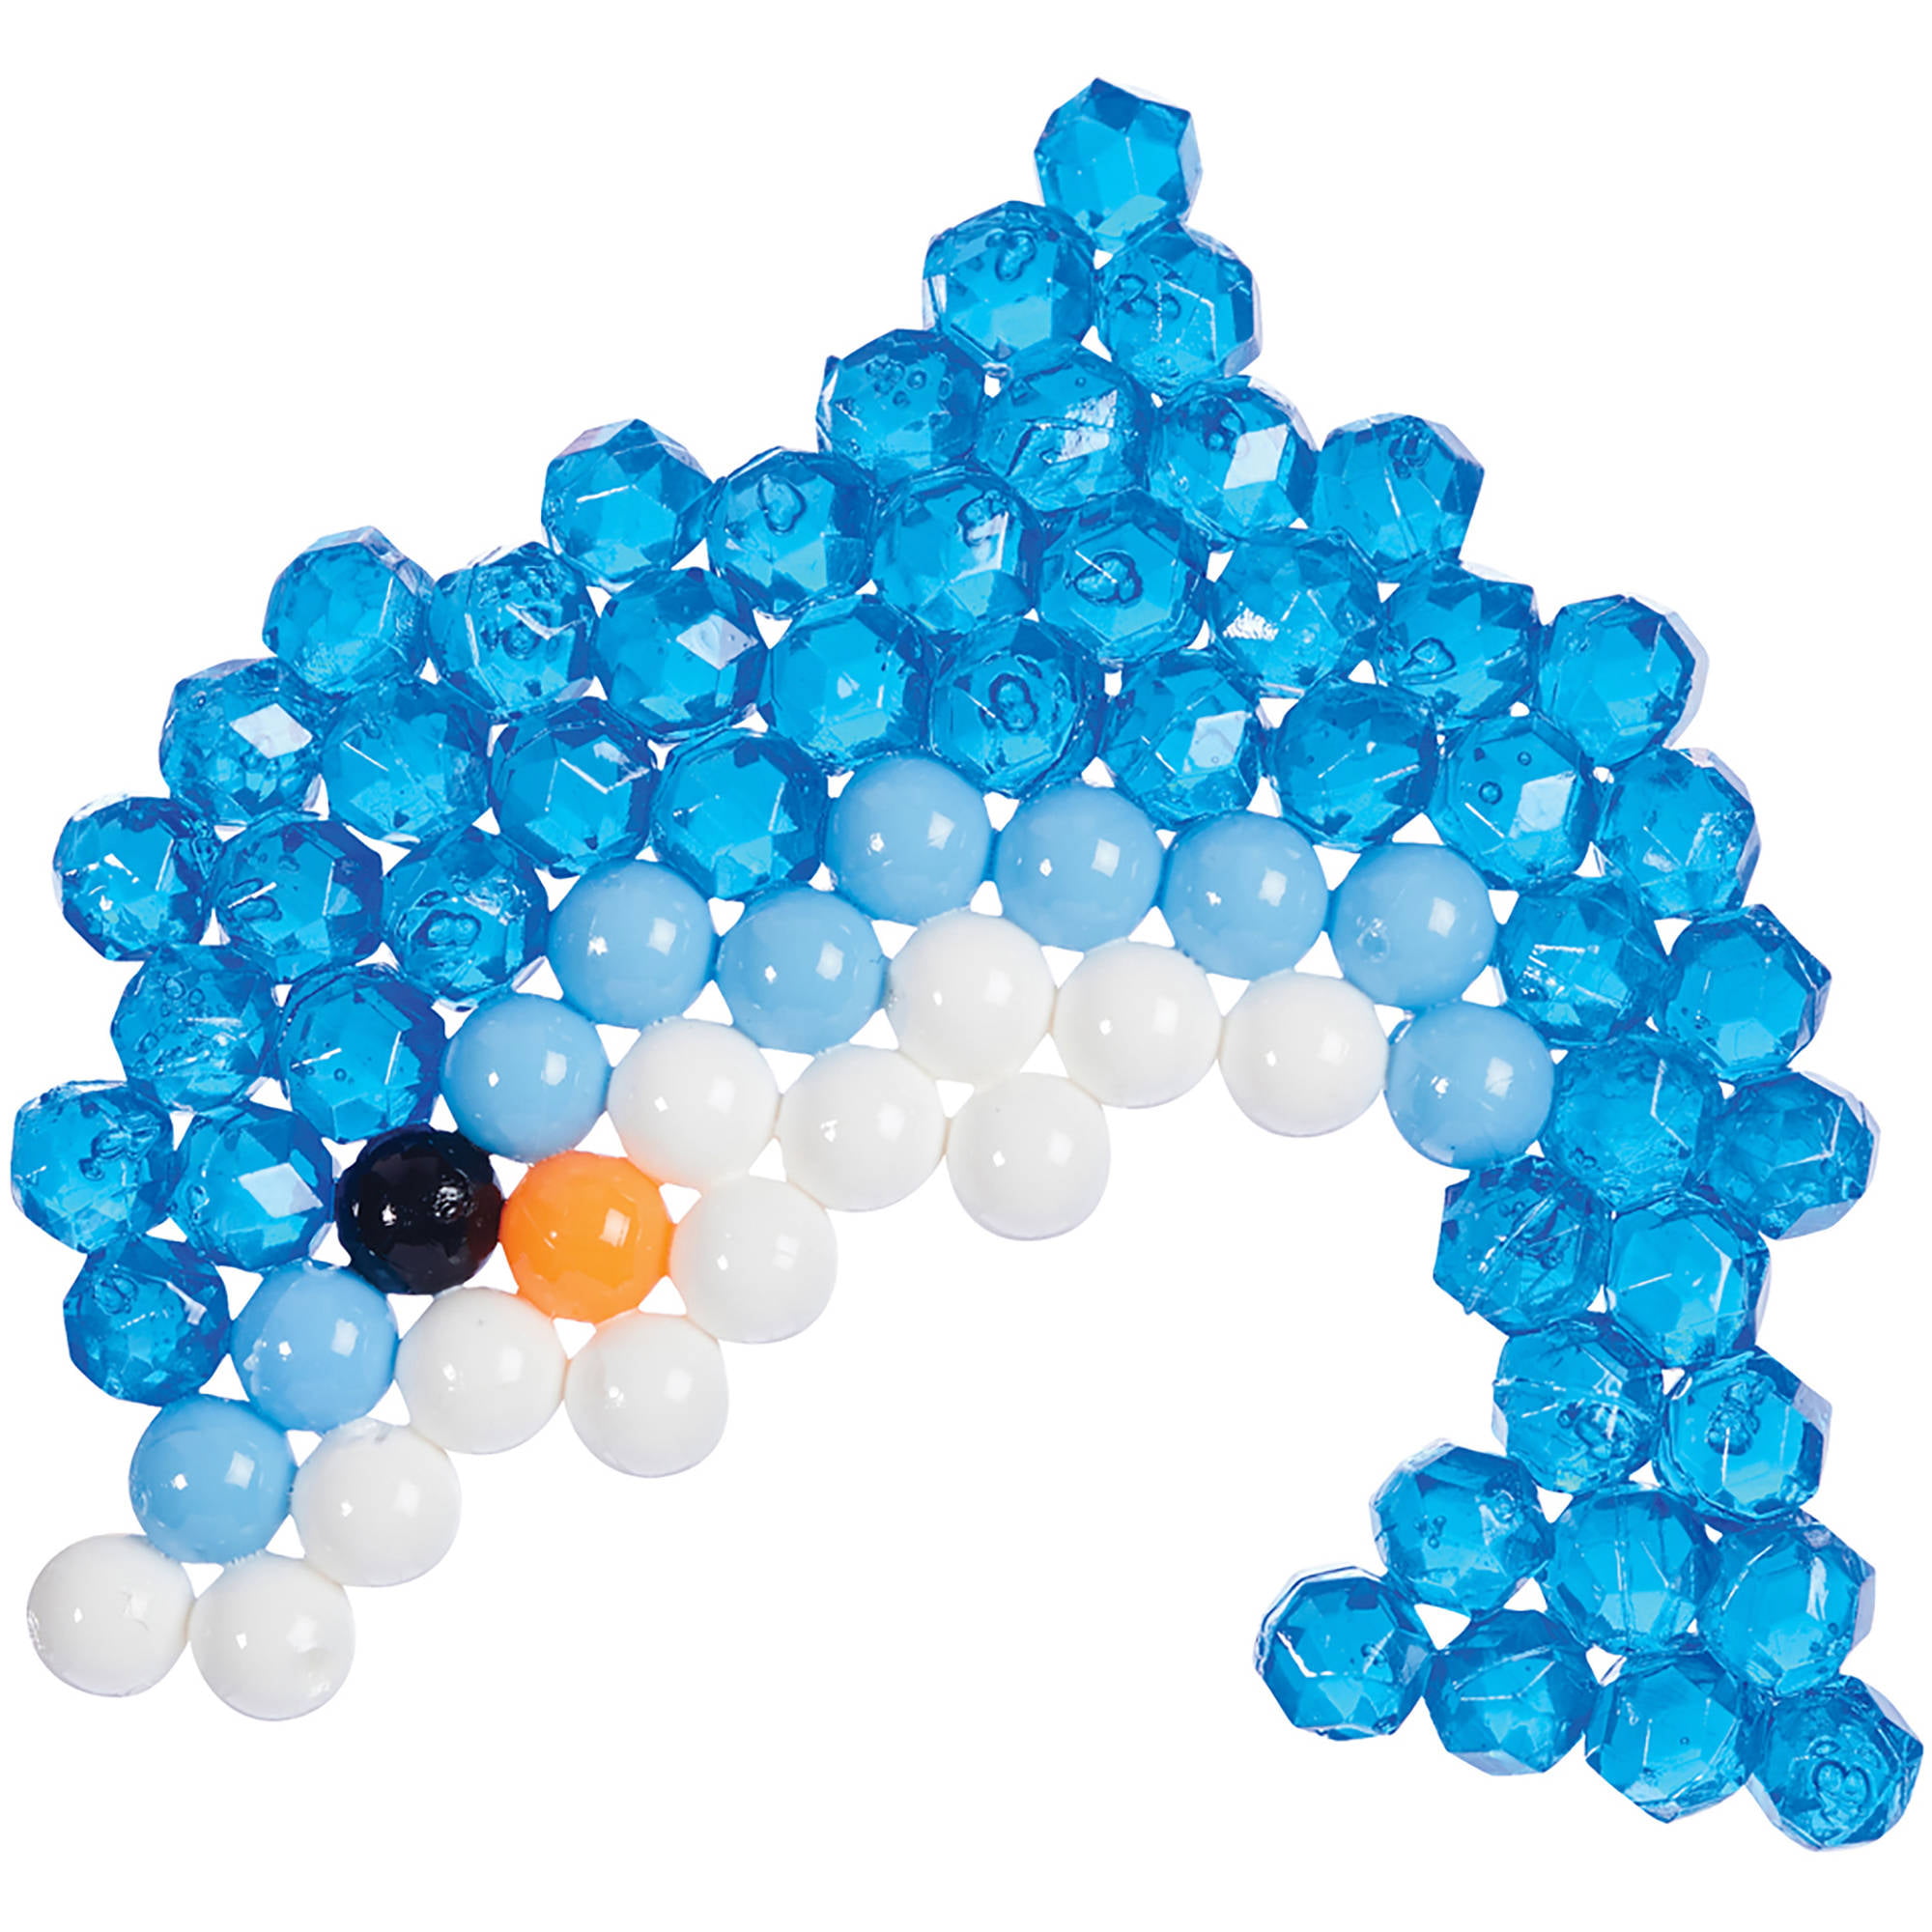 Aquabeads Zoo Life Set Theme Bead Refill With Over 600 Beads And